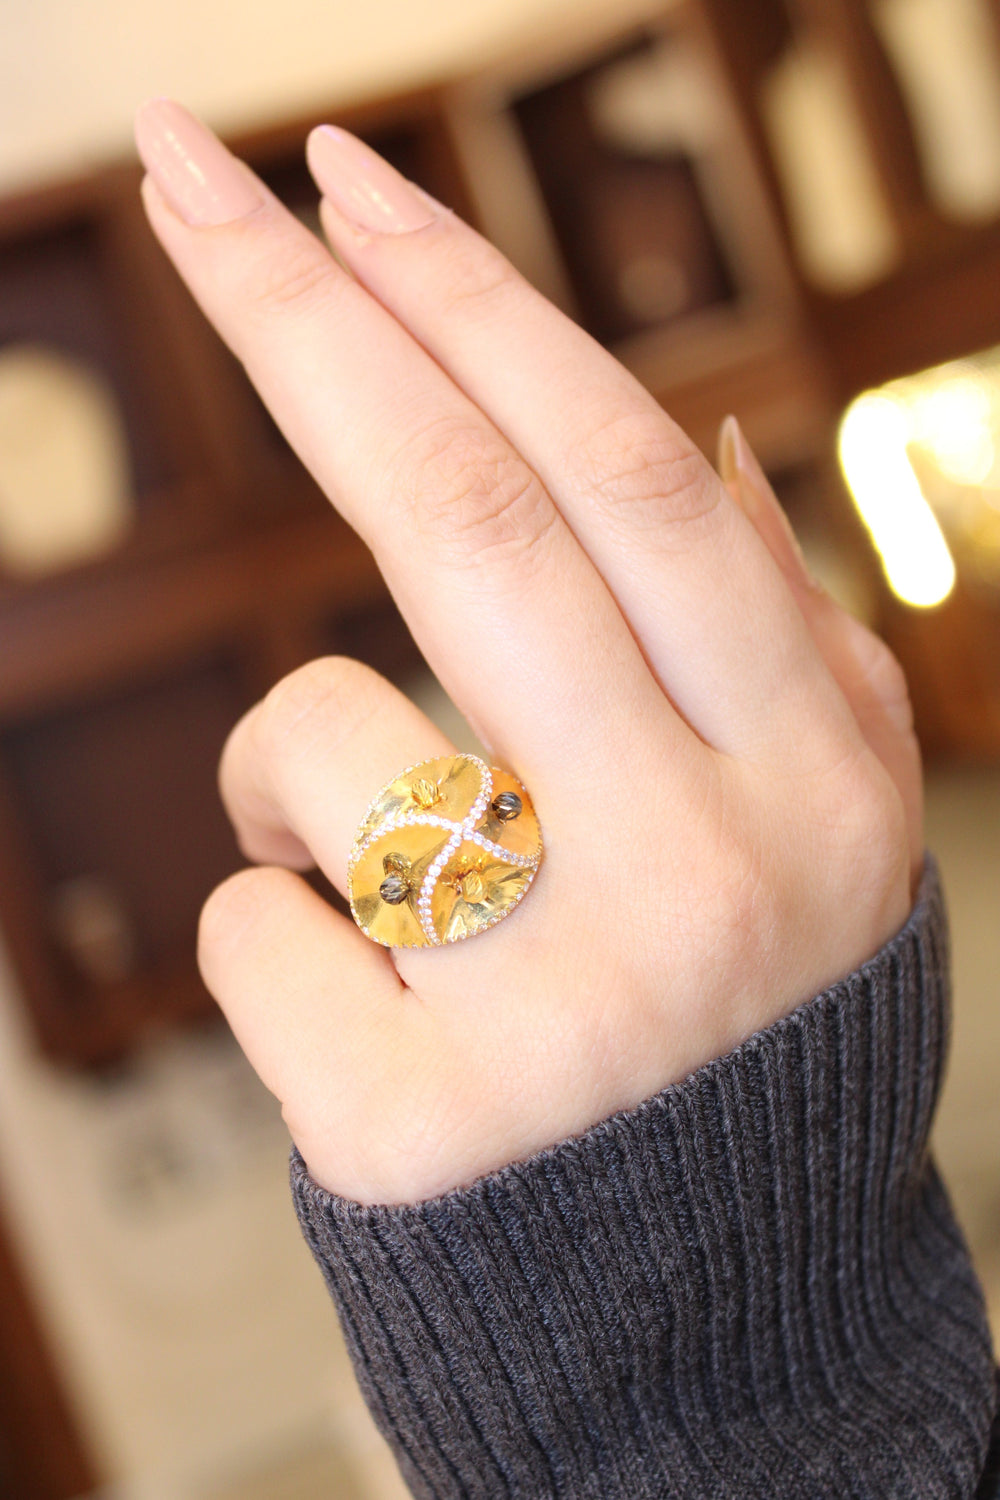 21K Turkish Ring Made of 21K Yellow Gold by Saeed Jewelry-10208